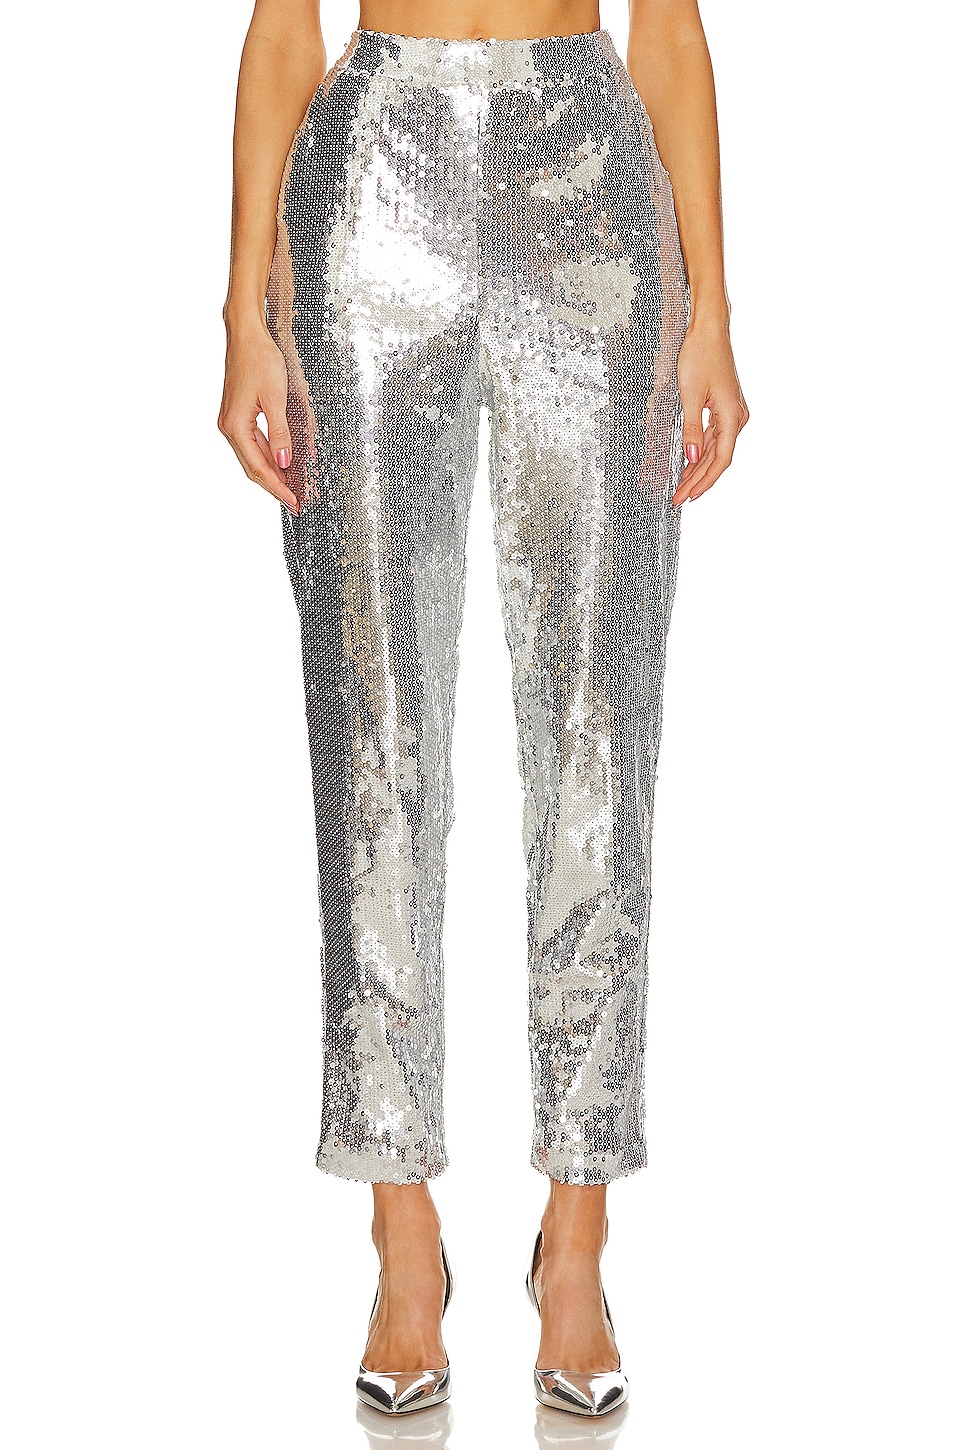 Buy Grey Sequin Pants For Women by Deme by Gabriella Online at Aza Fashions.